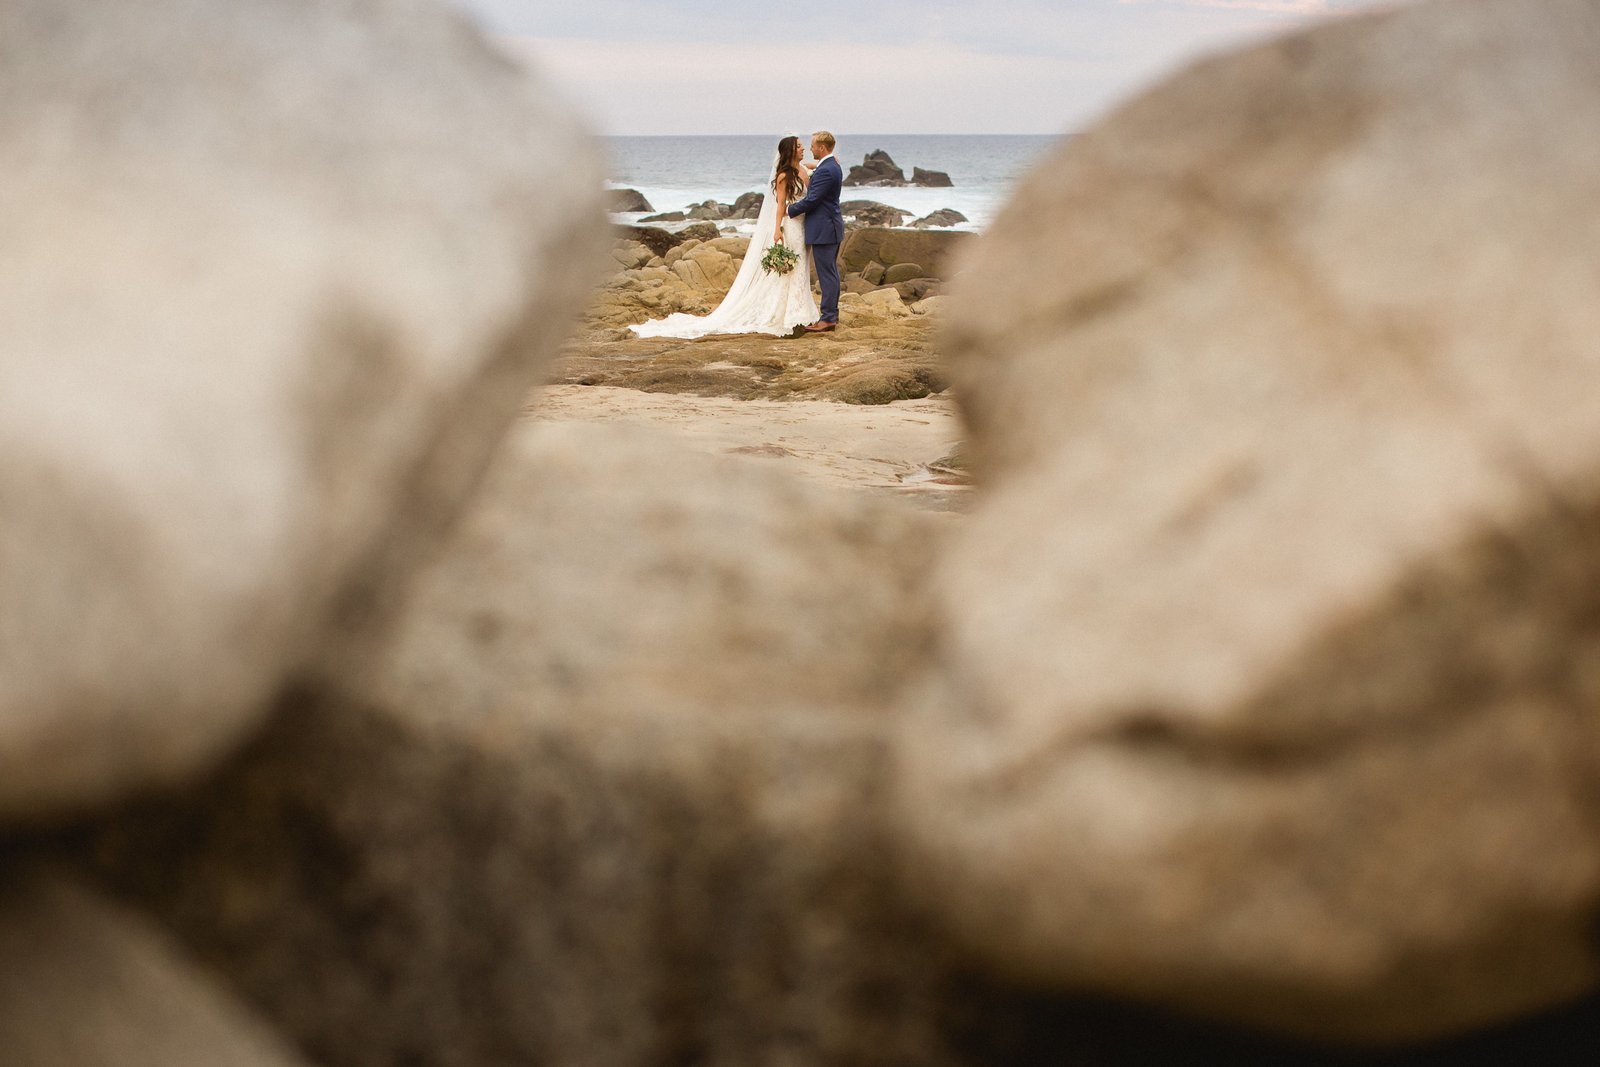 Bride and Groom during their photo session at the Beach in front of The Cape. Wedding Planning done by Cabo Wedding Services